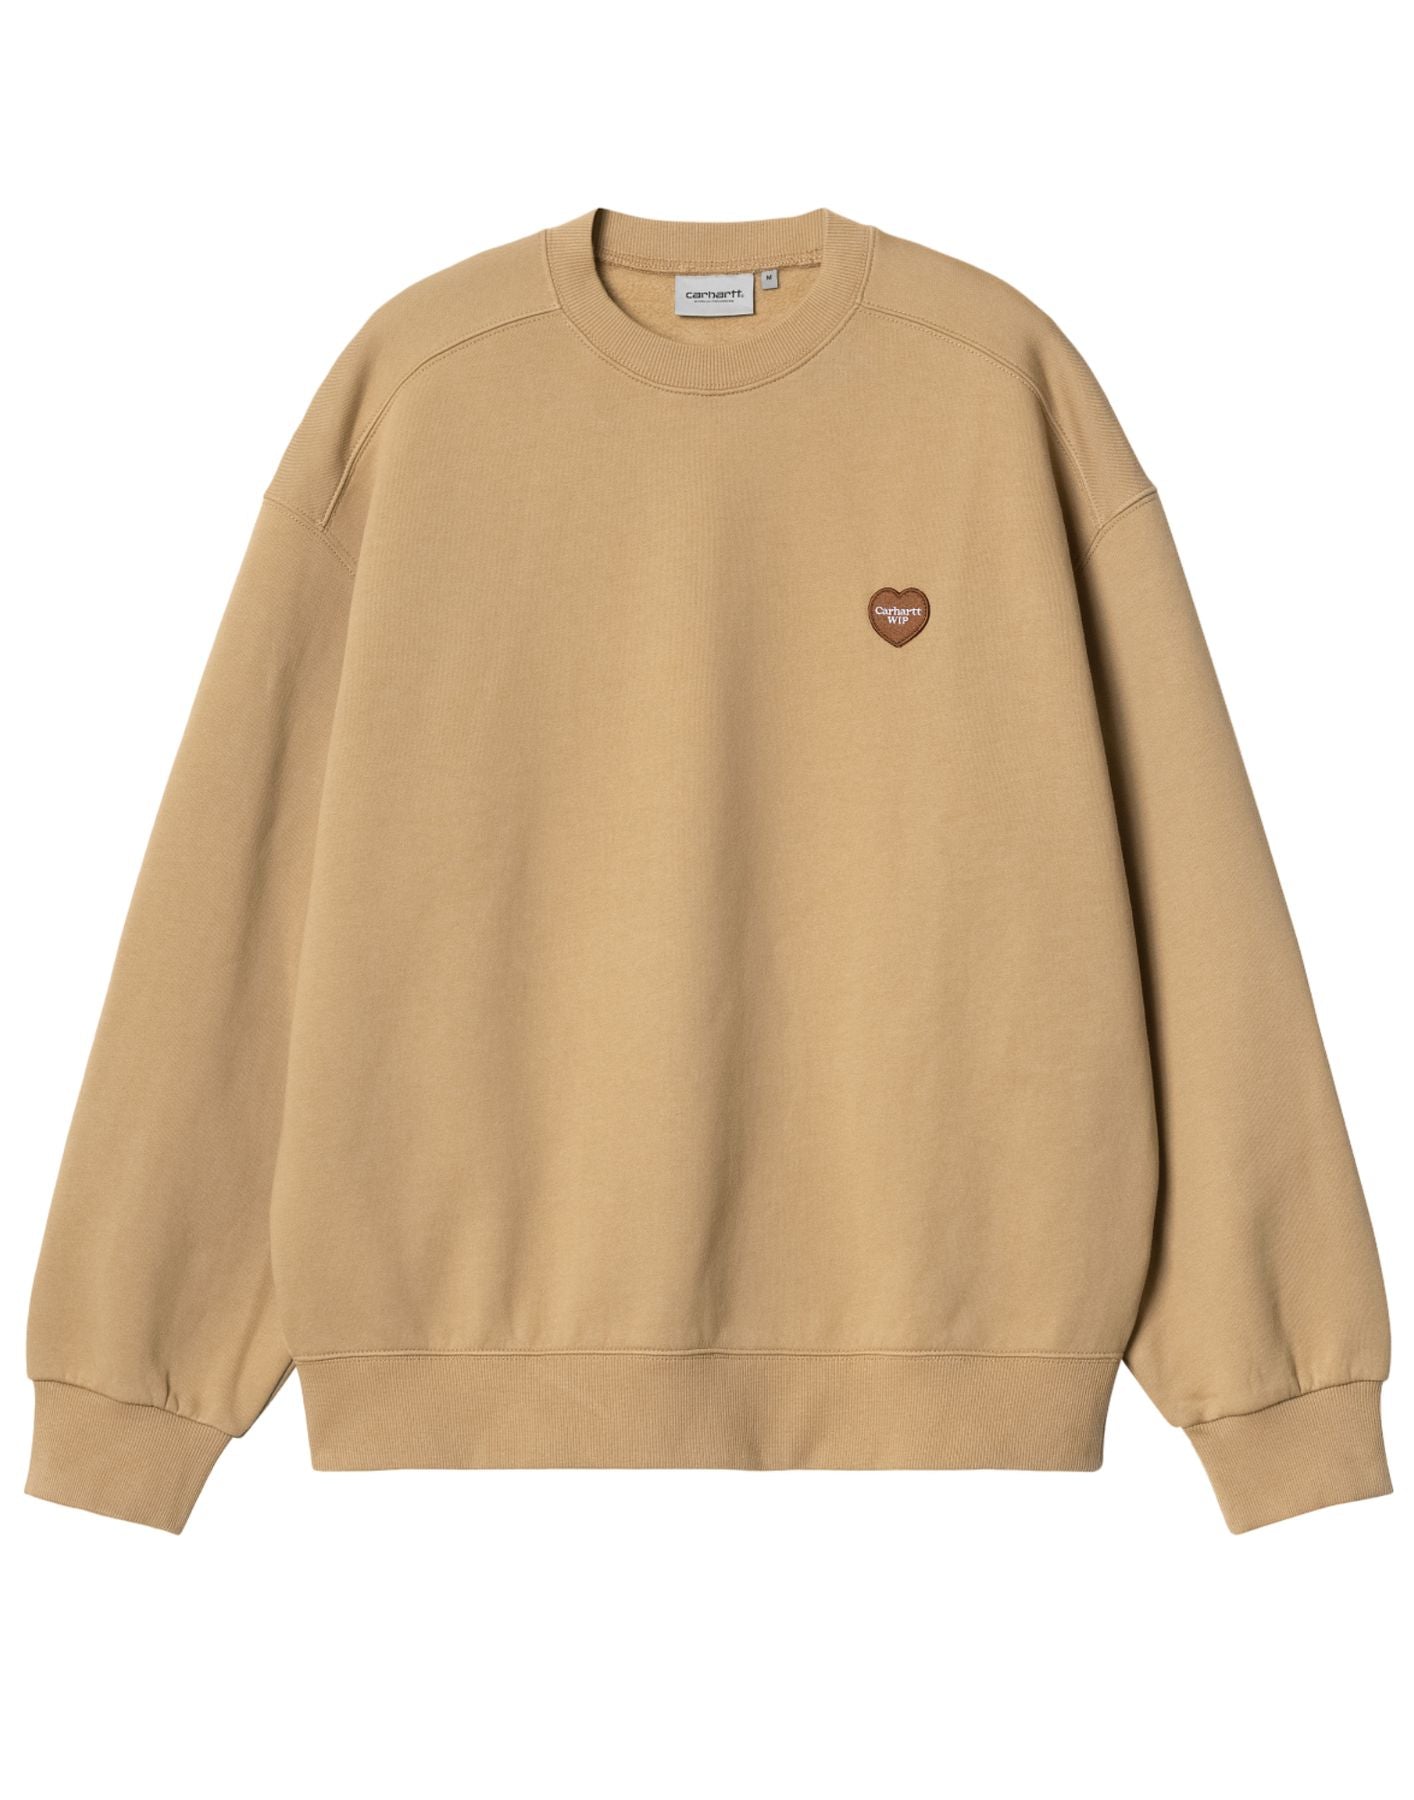 Sweat-shirt pour homme I032167 Dusty H Brown CARHARTT WIP